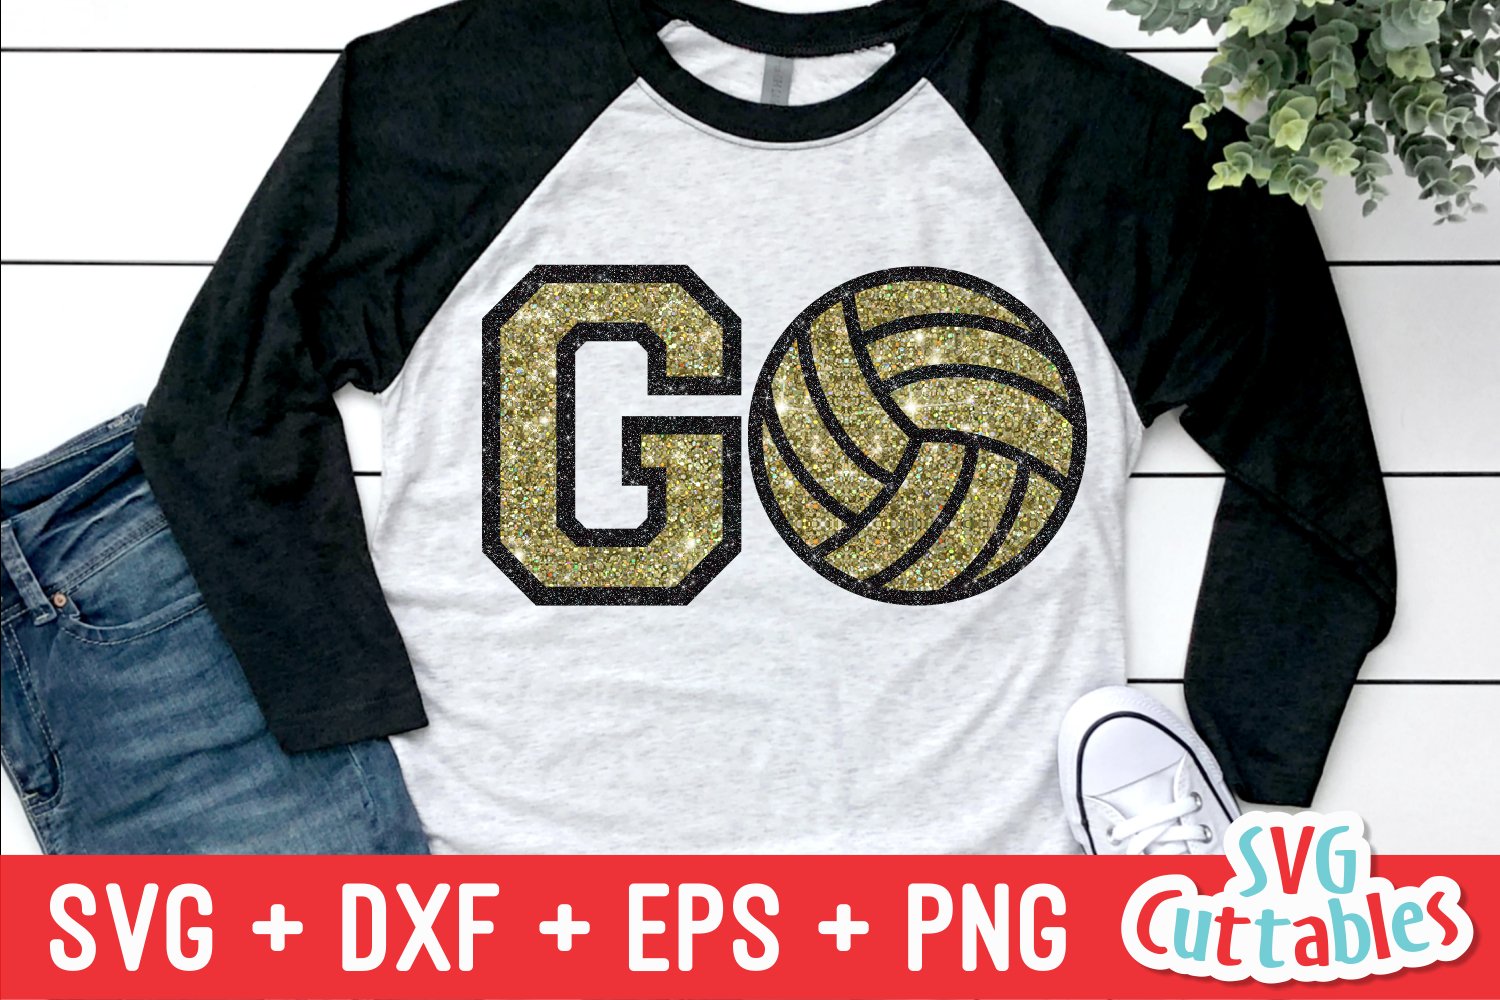 Volleyball design for clothes.